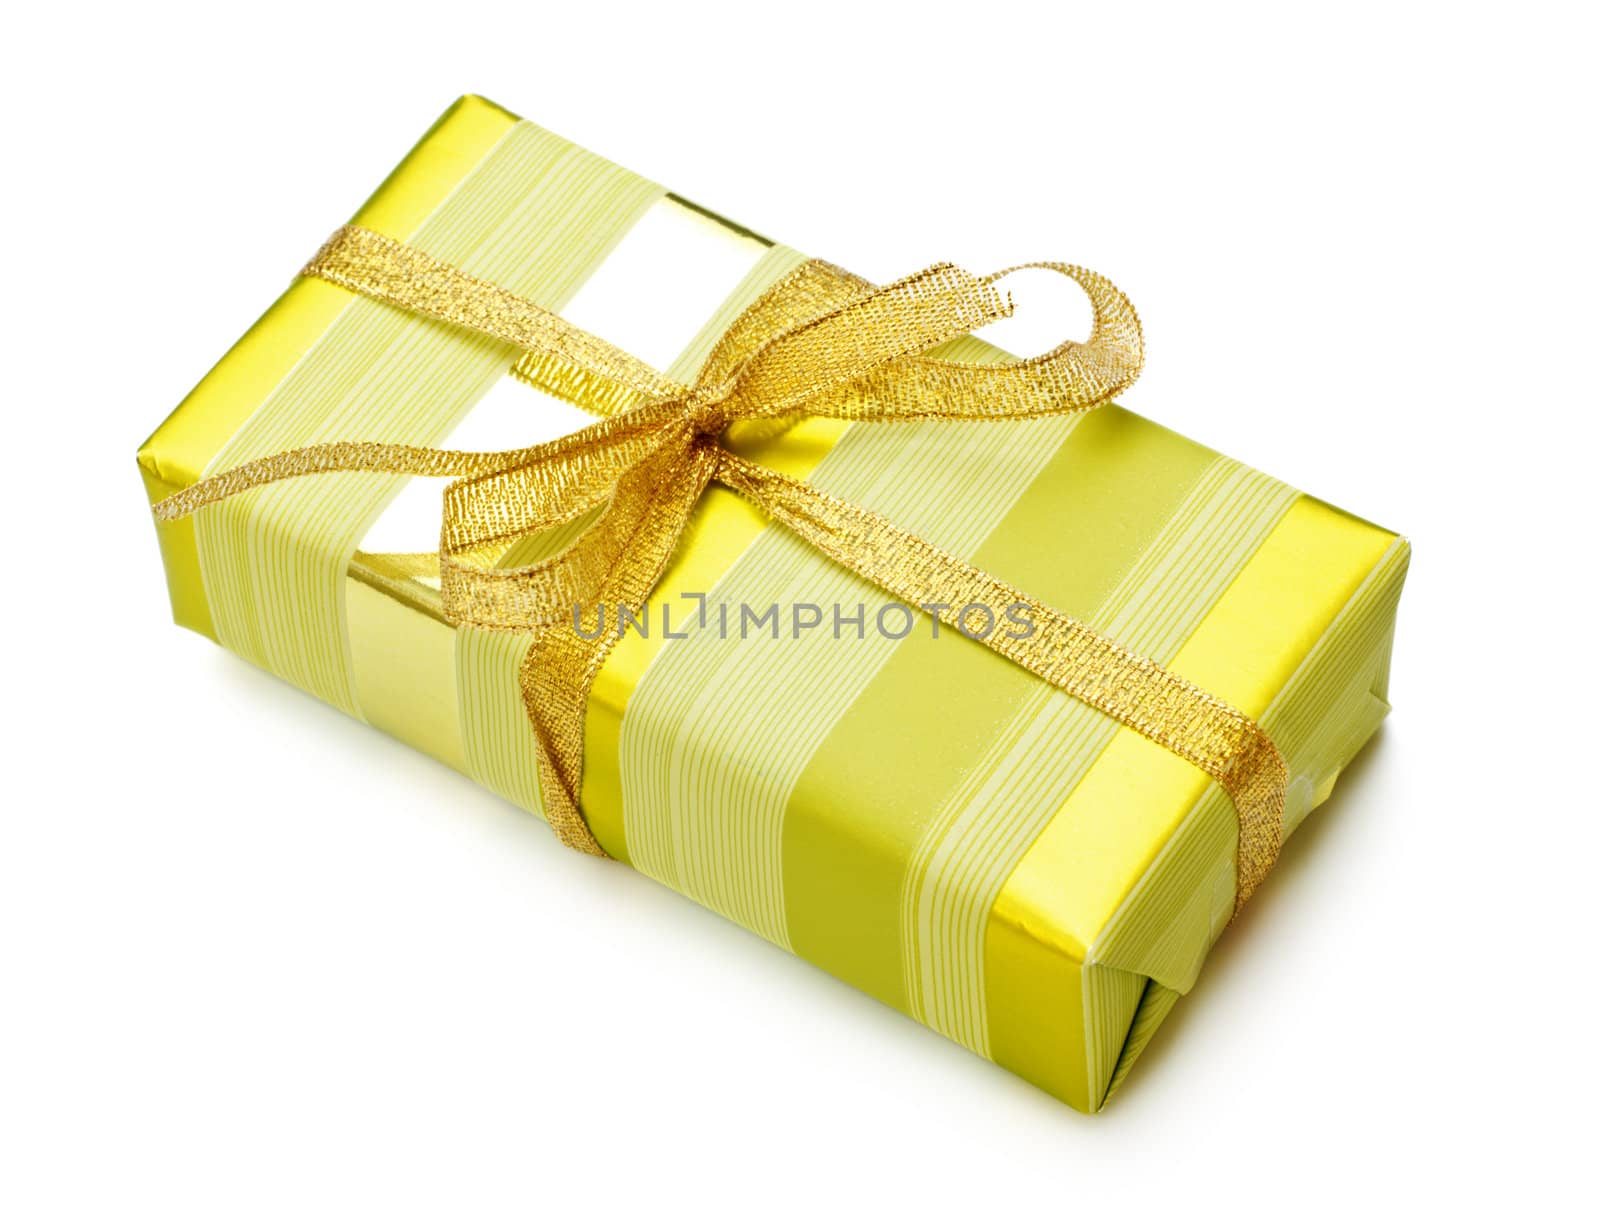 yellow striped gift box isolated on white